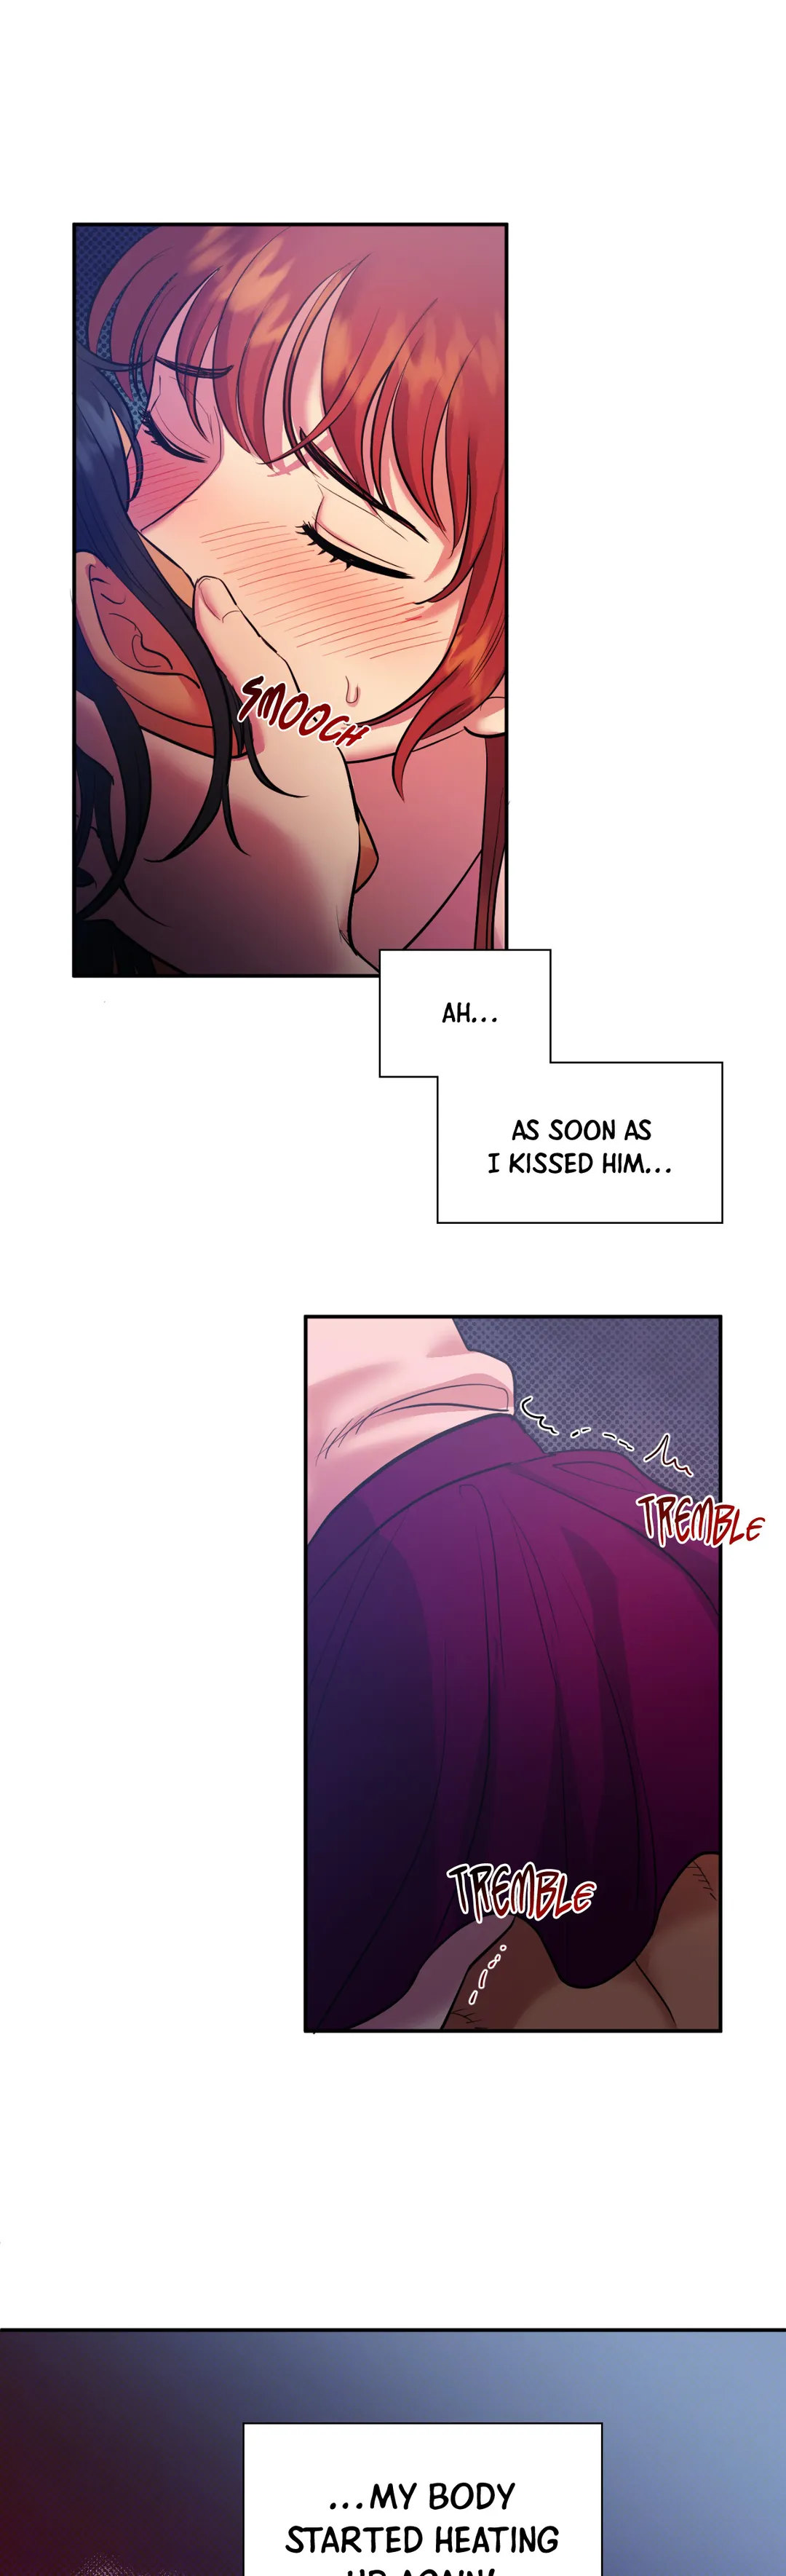 Hana’s Demons of Lust - Chapter 11 Page 2